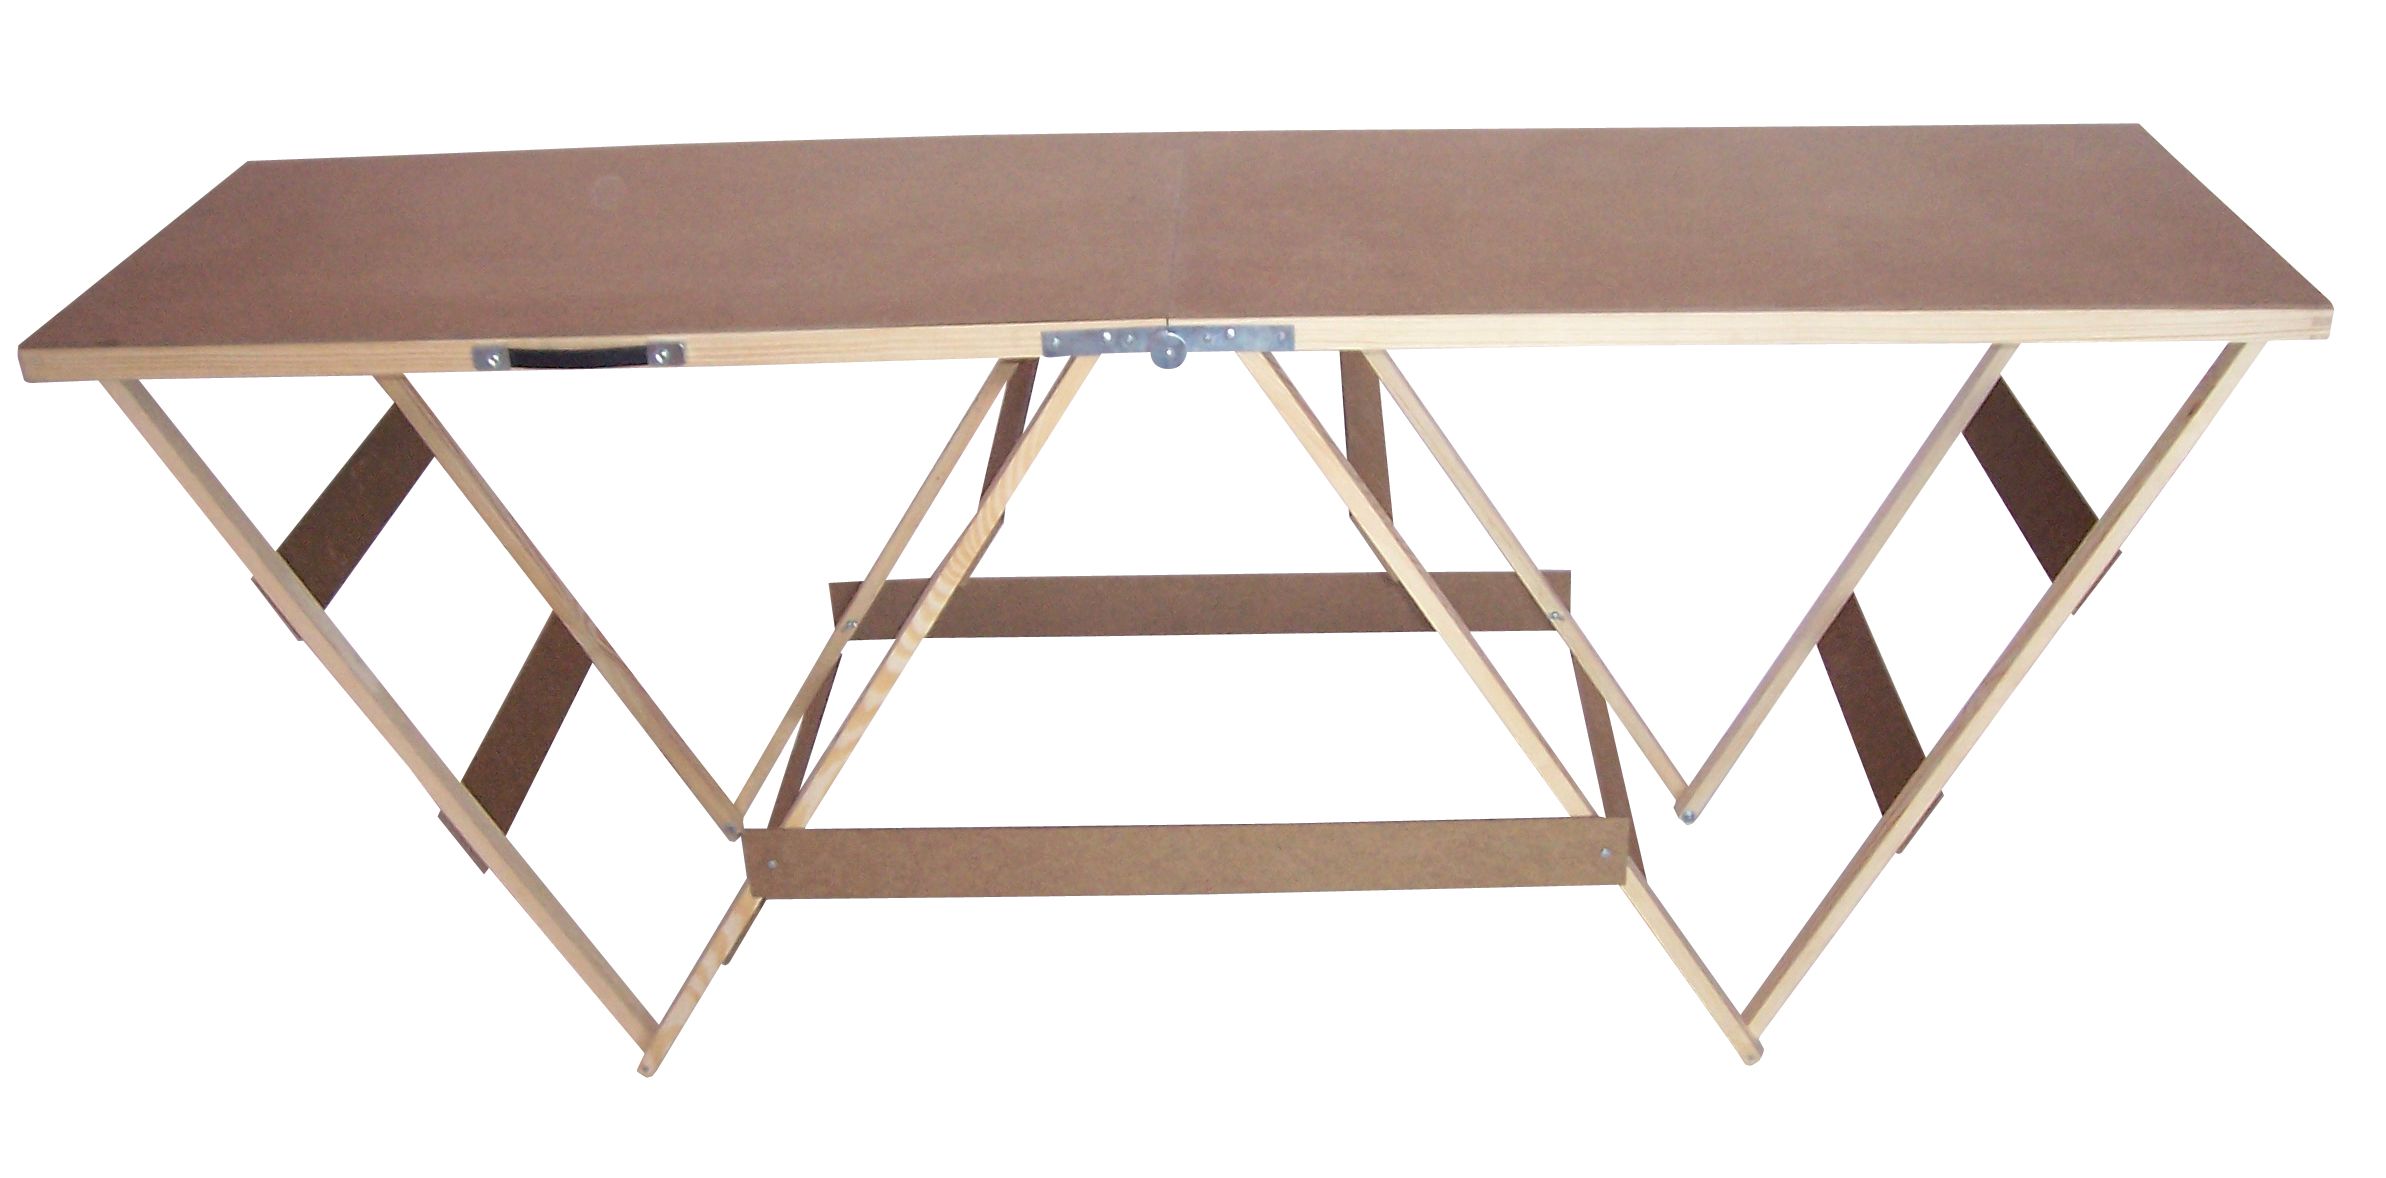 B&Q Foldable Decorating Table (H)70mm (W)560mm (L)1000mm | Departments